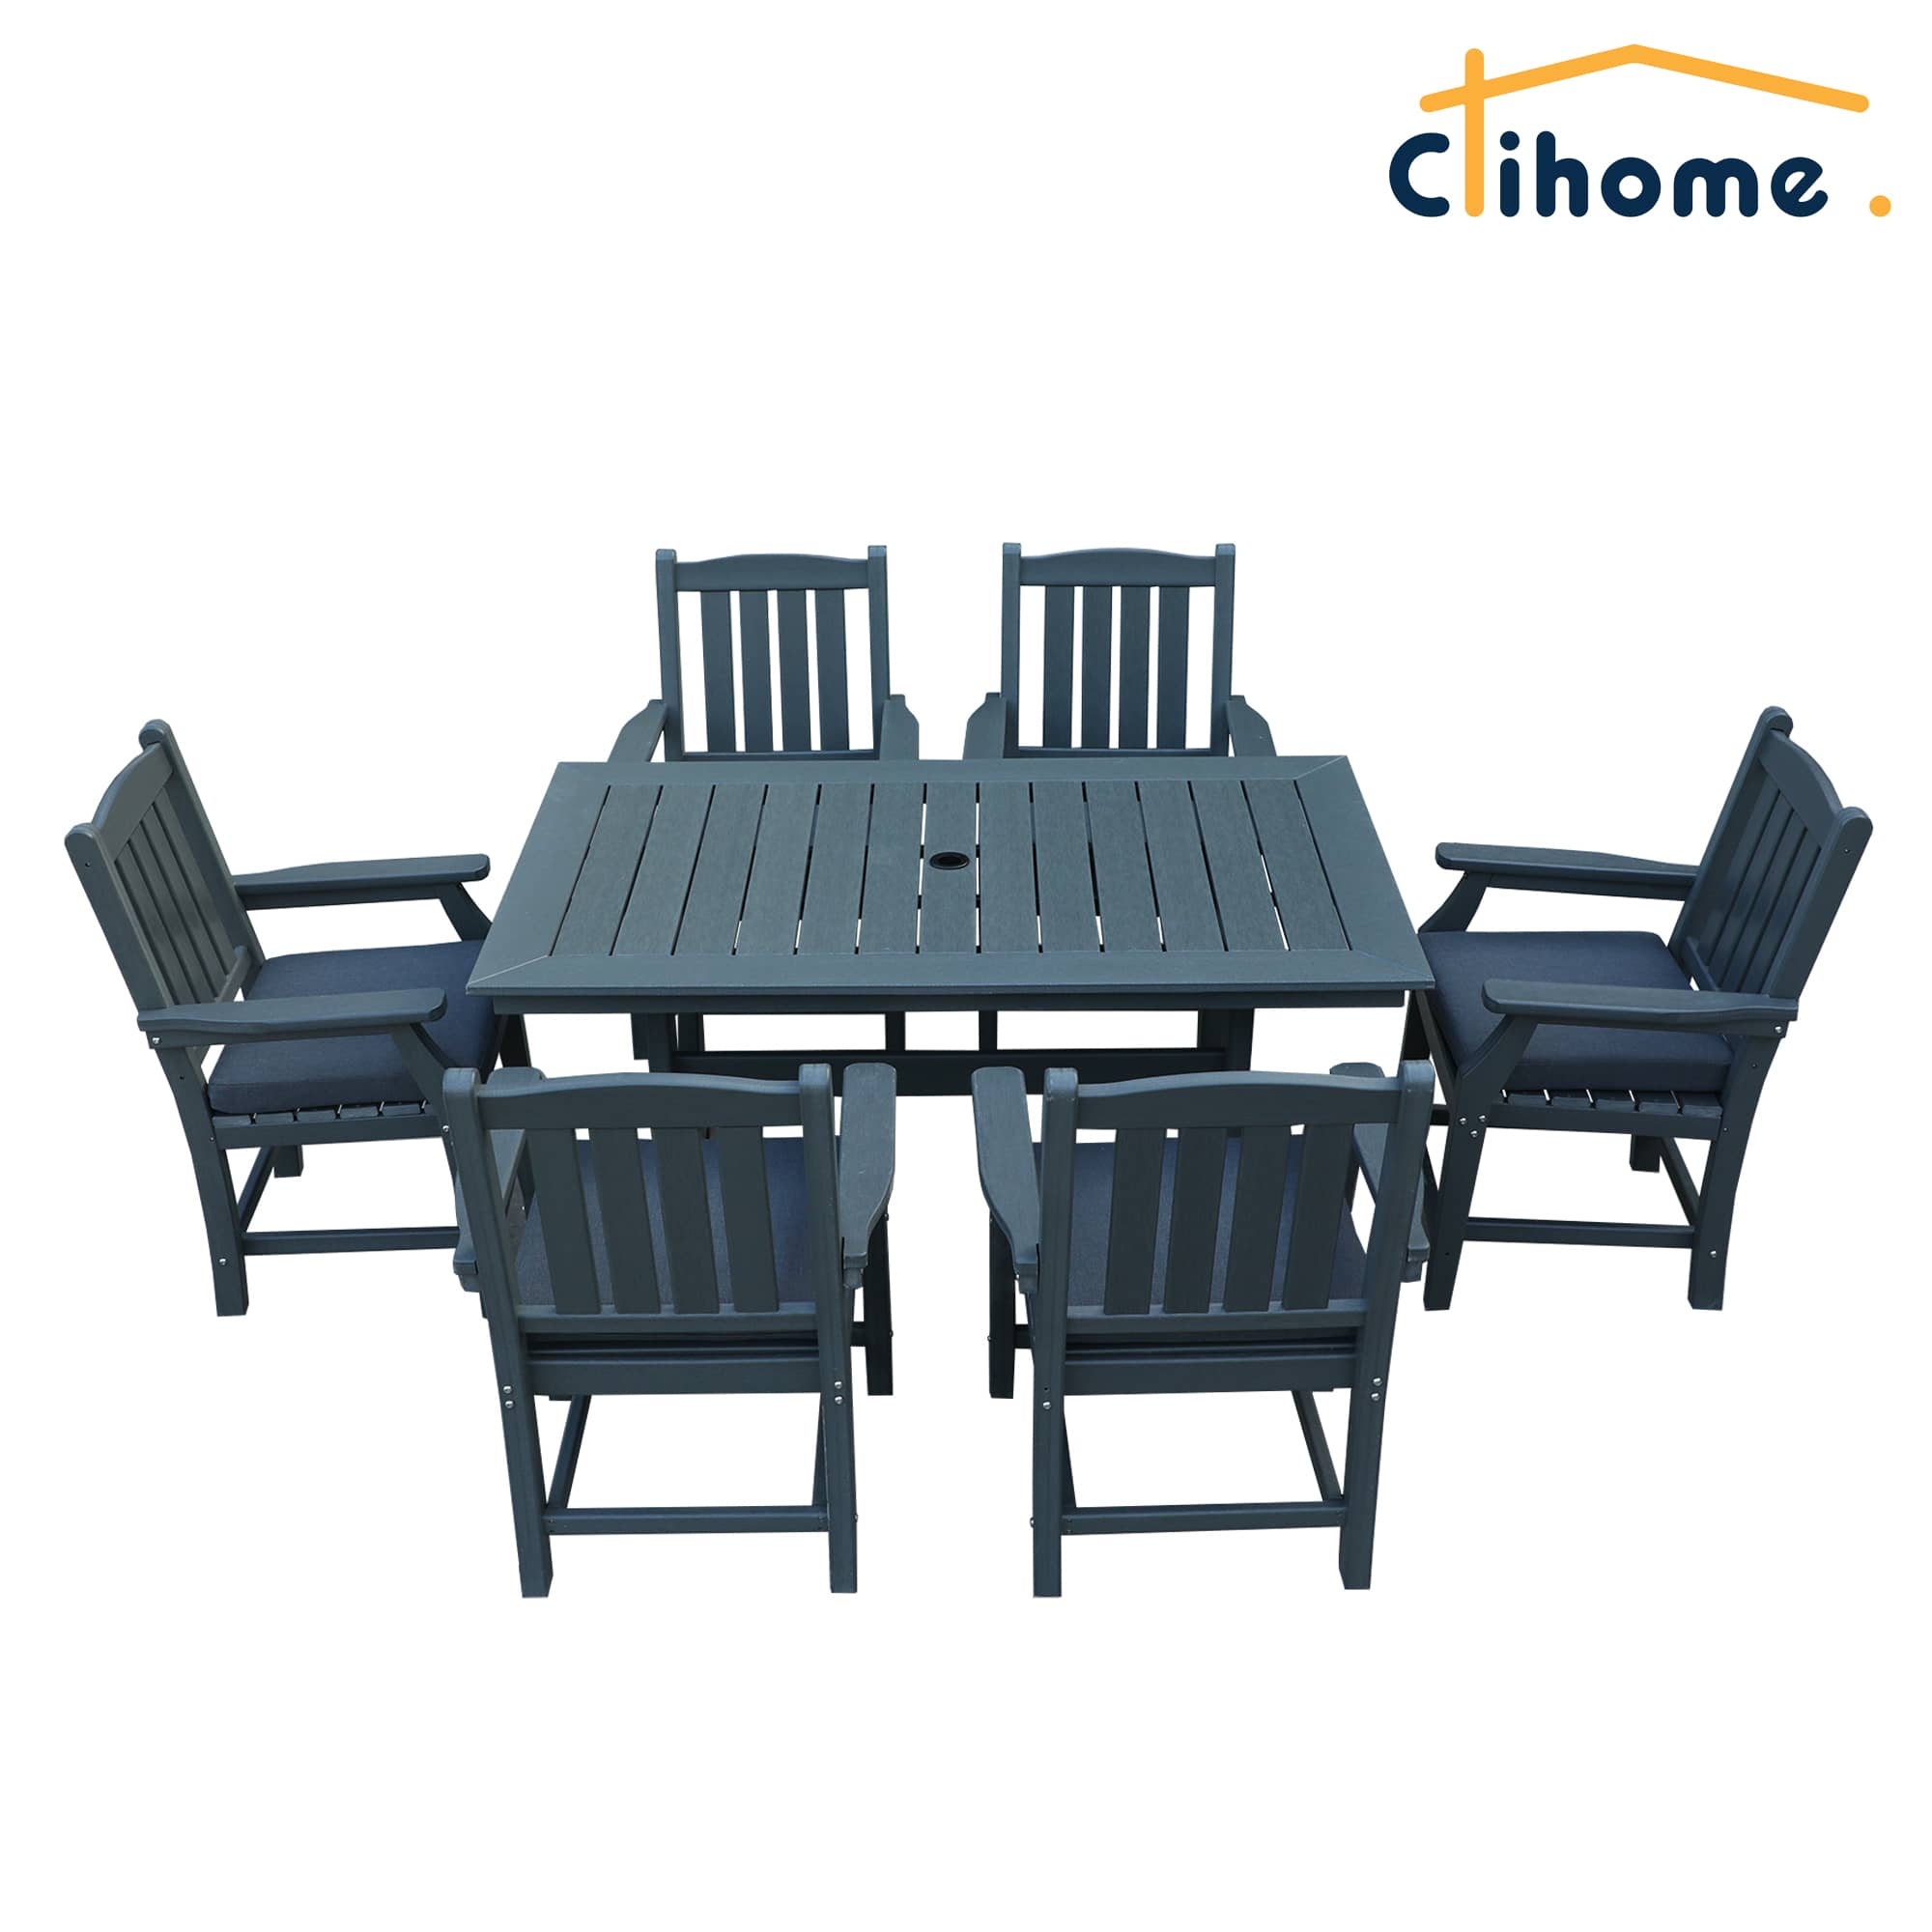 Clihome 7-piece patio dining table and chairs set